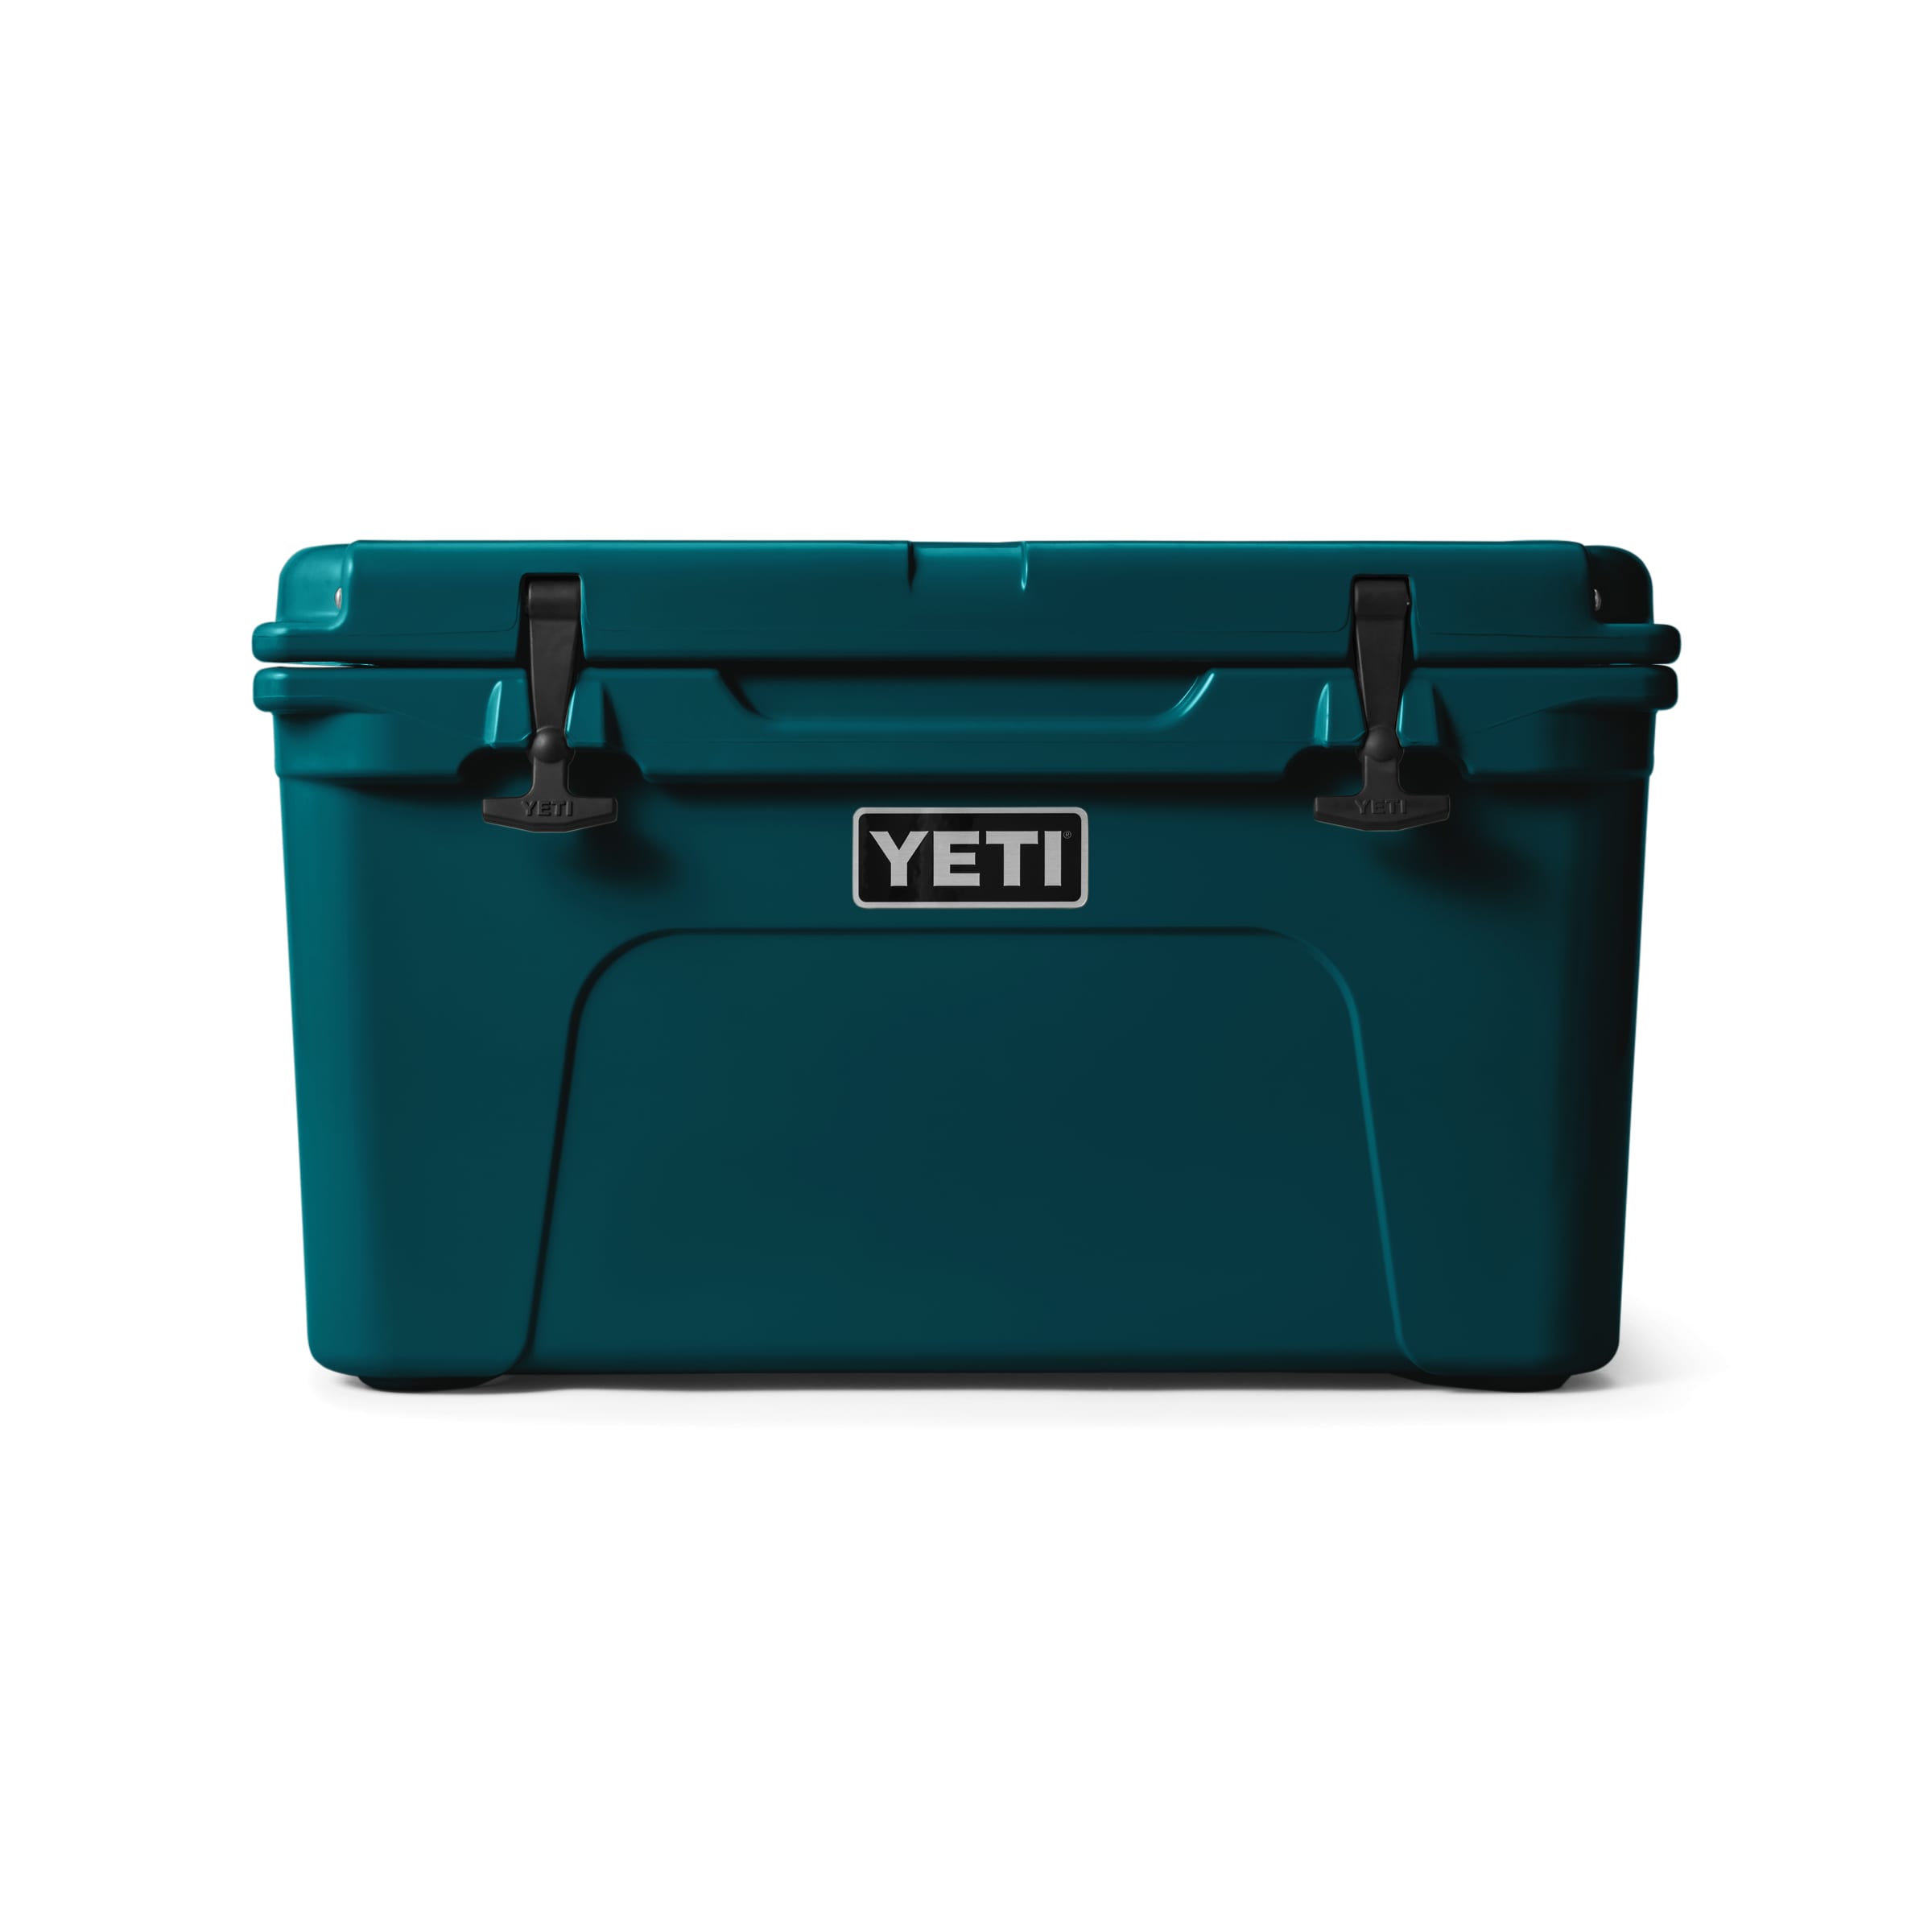 Yeti Coolers Tundra 45 Series Cooler